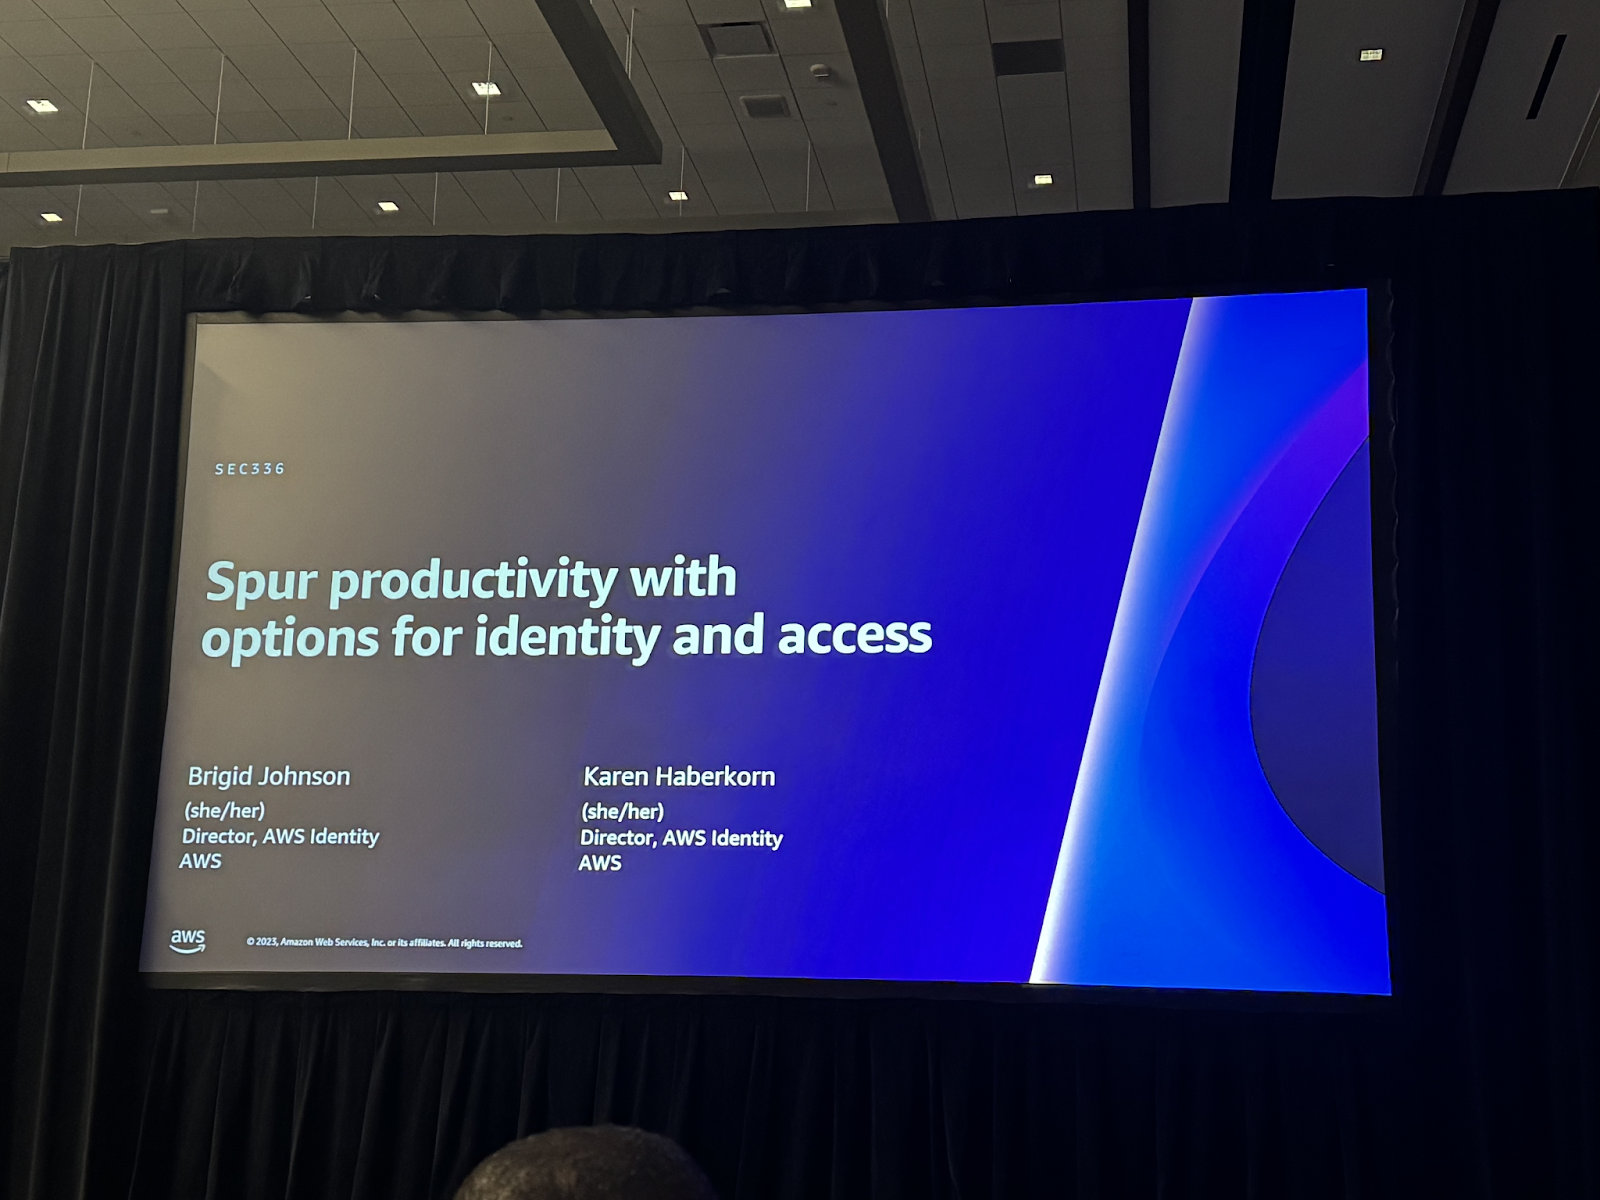 Spur productivity with options for identity and access